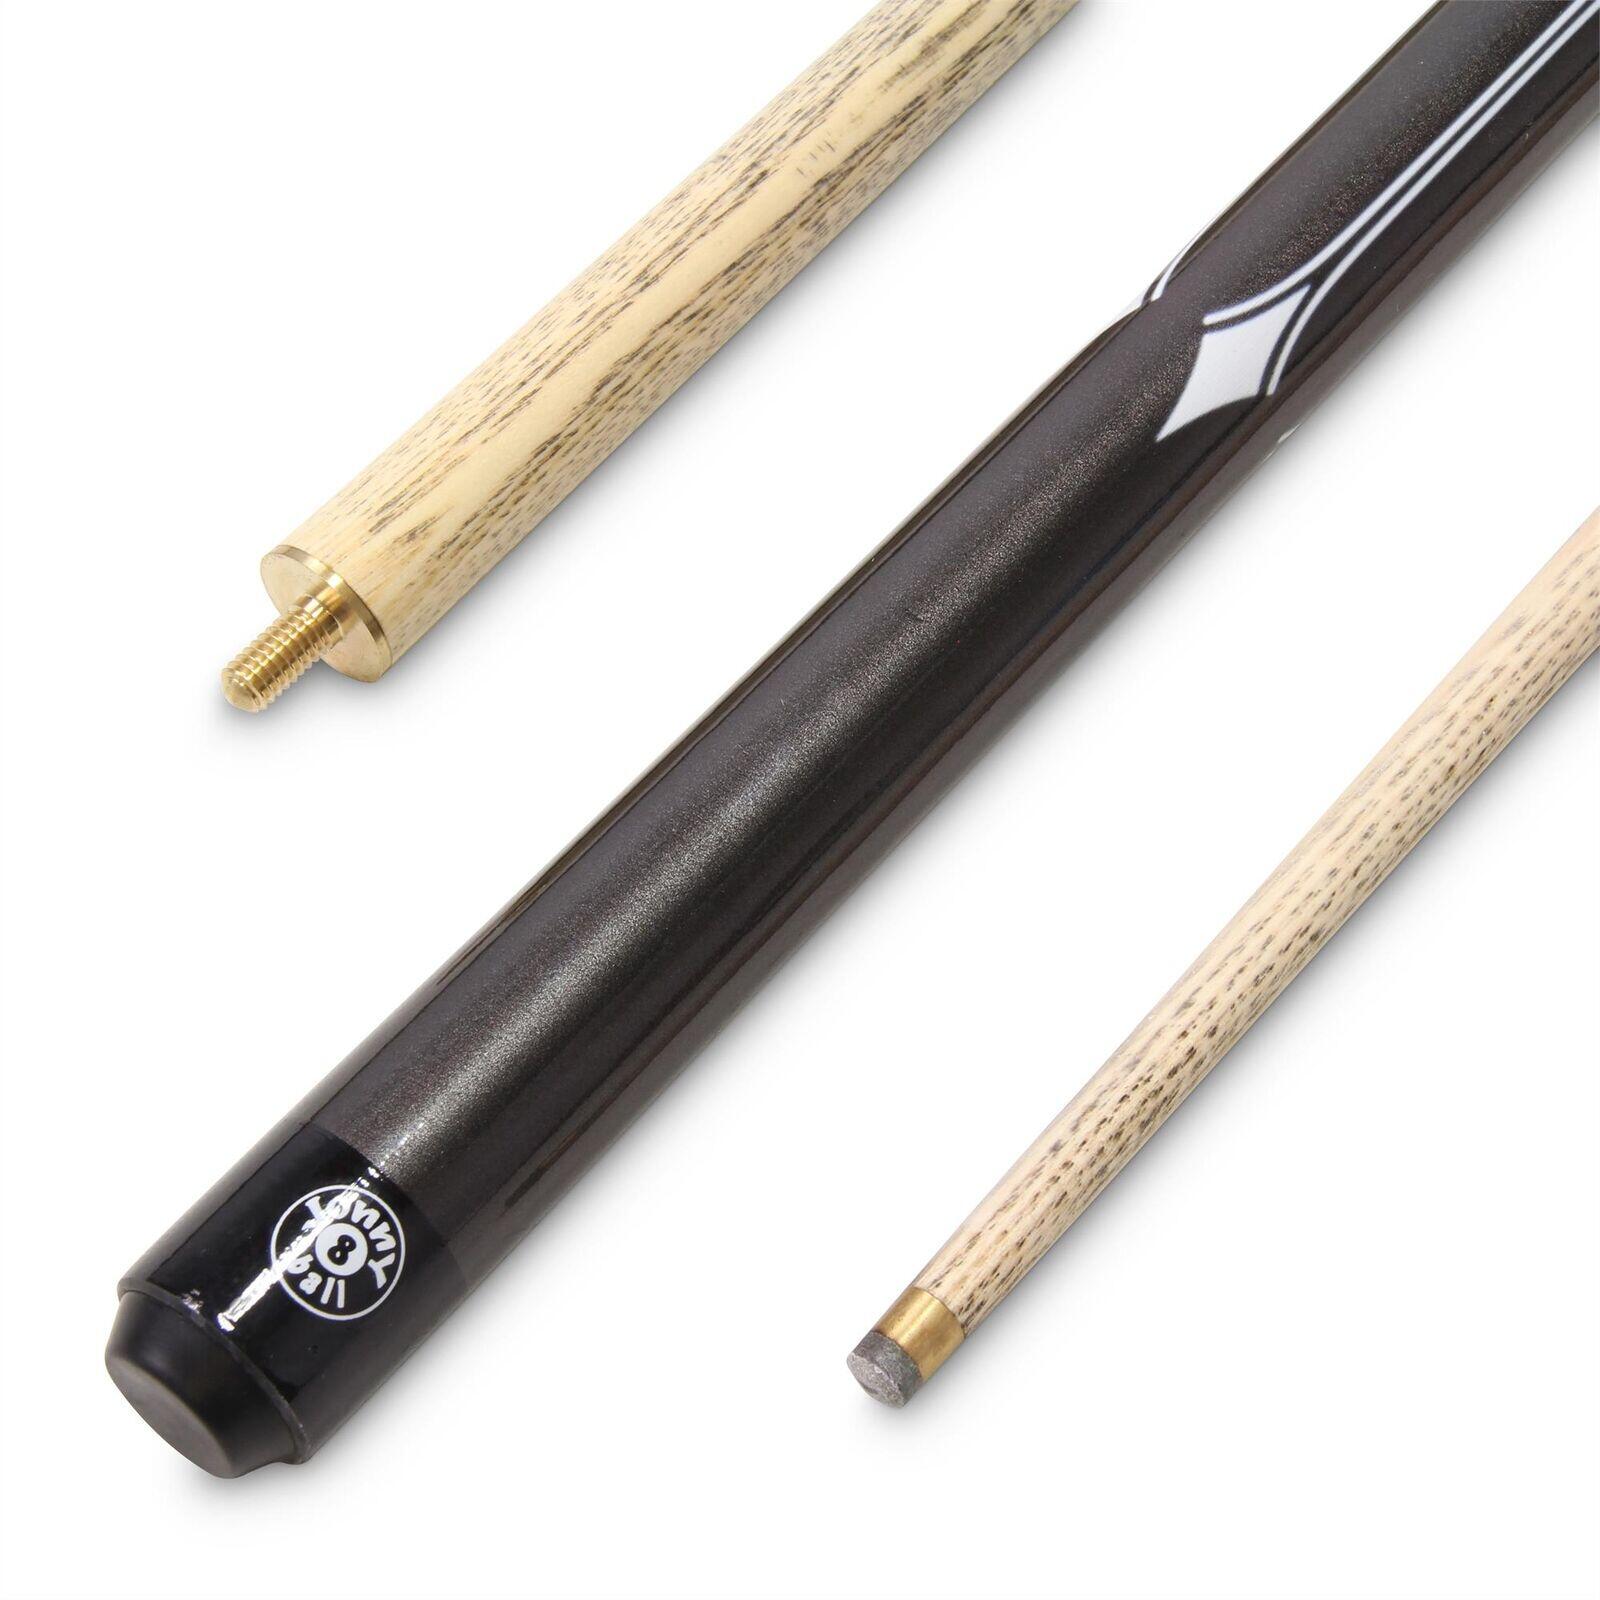 FUNKY CHALK Jonny 8 Ball WHITE SPEAR 57 Inch 2 Piece Snooker Pool Cue with 9.5mm Tip